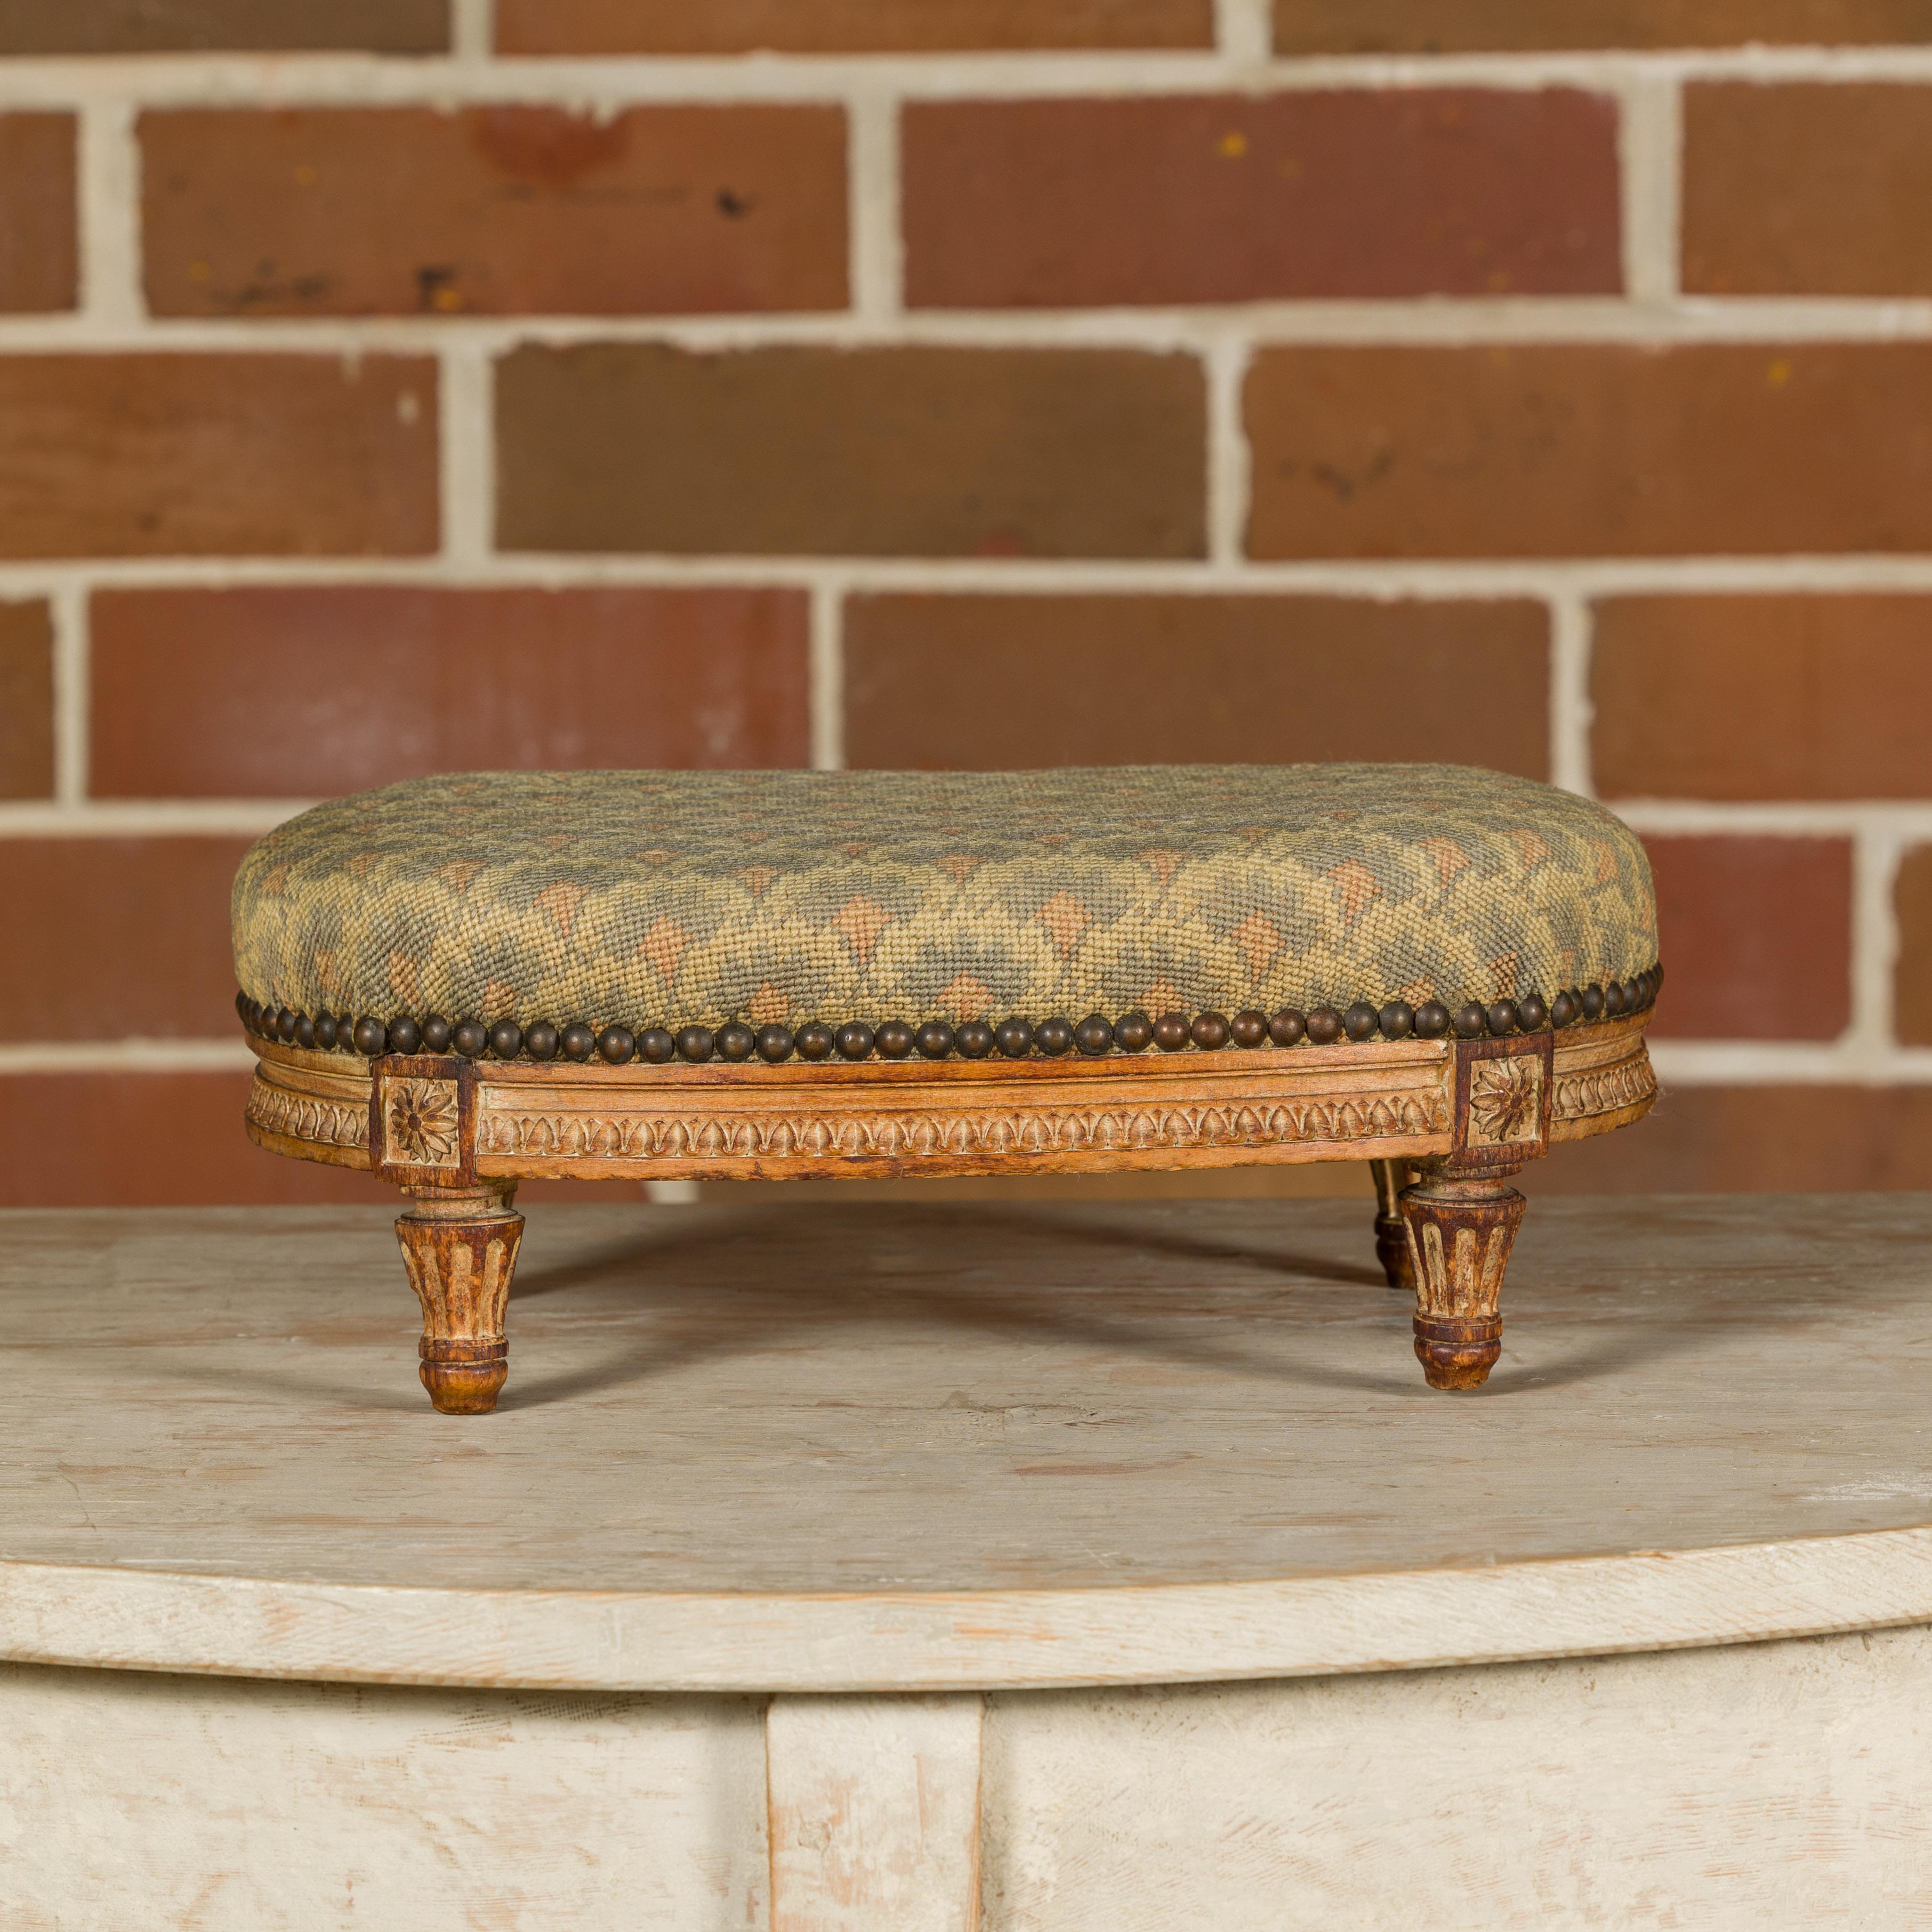 A French Louis XVI style wooden footstool from the late 19th century stamped Alexandre Pihouée with carved base, tapered fluted legs and needlepoint upholstery. Indulge in the refined elegance of the late 19th-century French Louis XVI style with